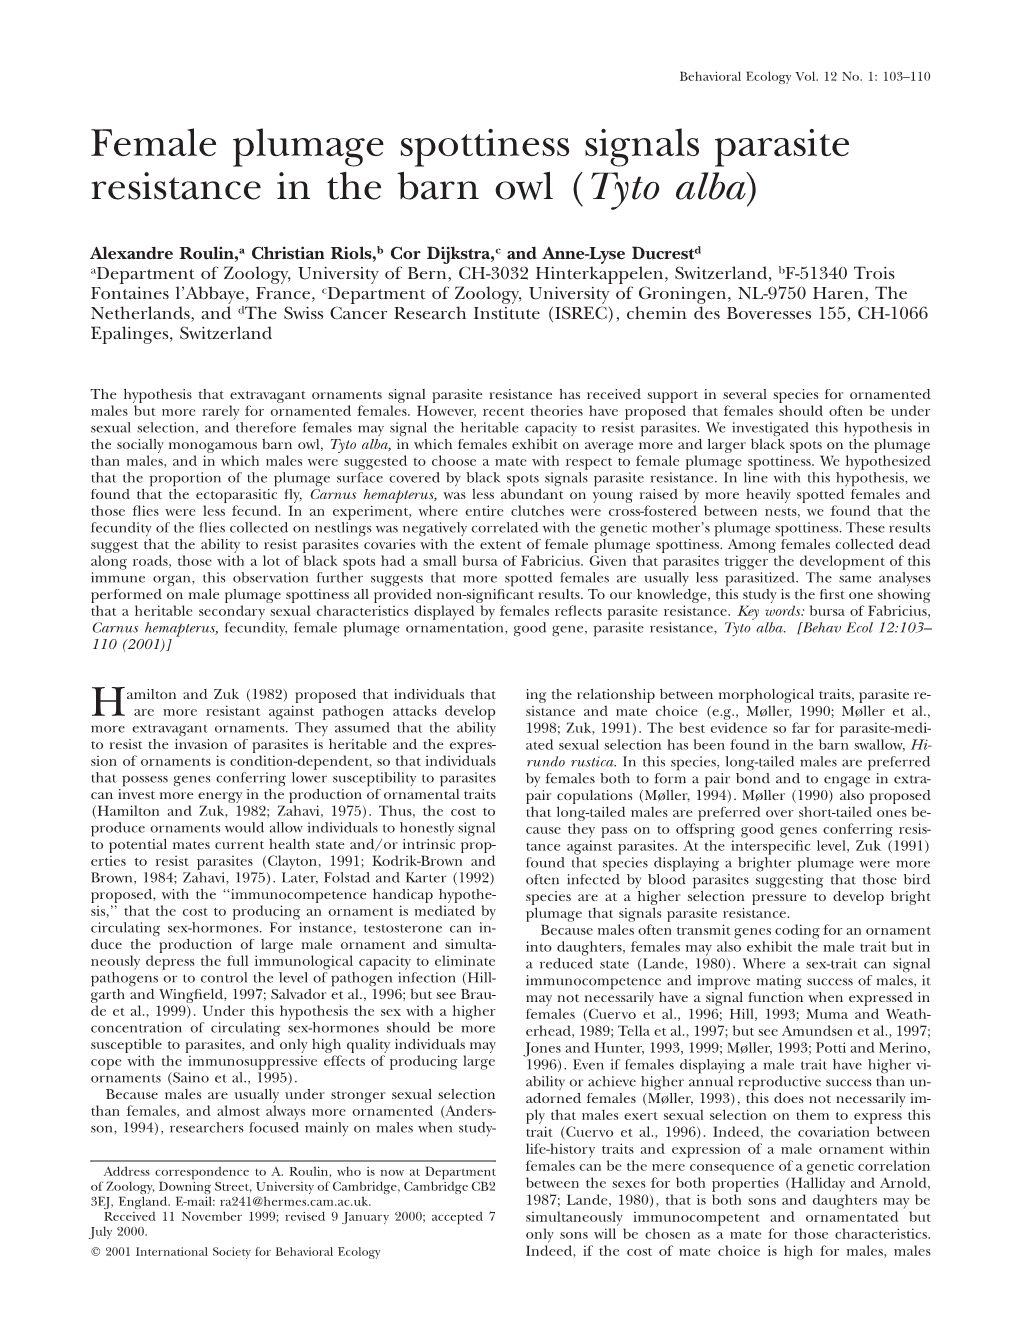 Female Plumage Spottiness Signals Parasite Resistance in the Barn Owl (Tyto Alba)